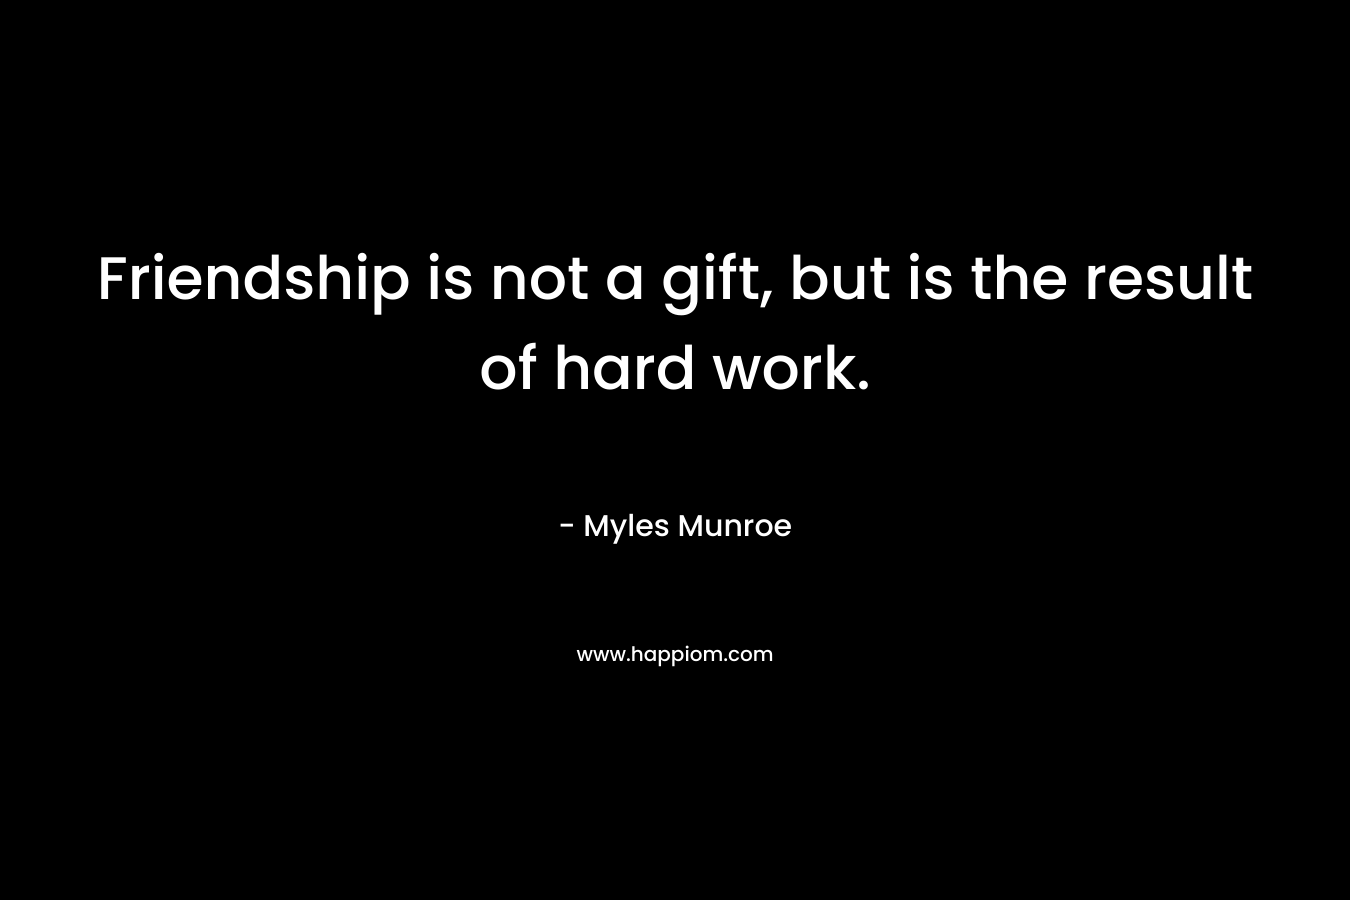 Friendship is not a gift, but is the result of hard work.